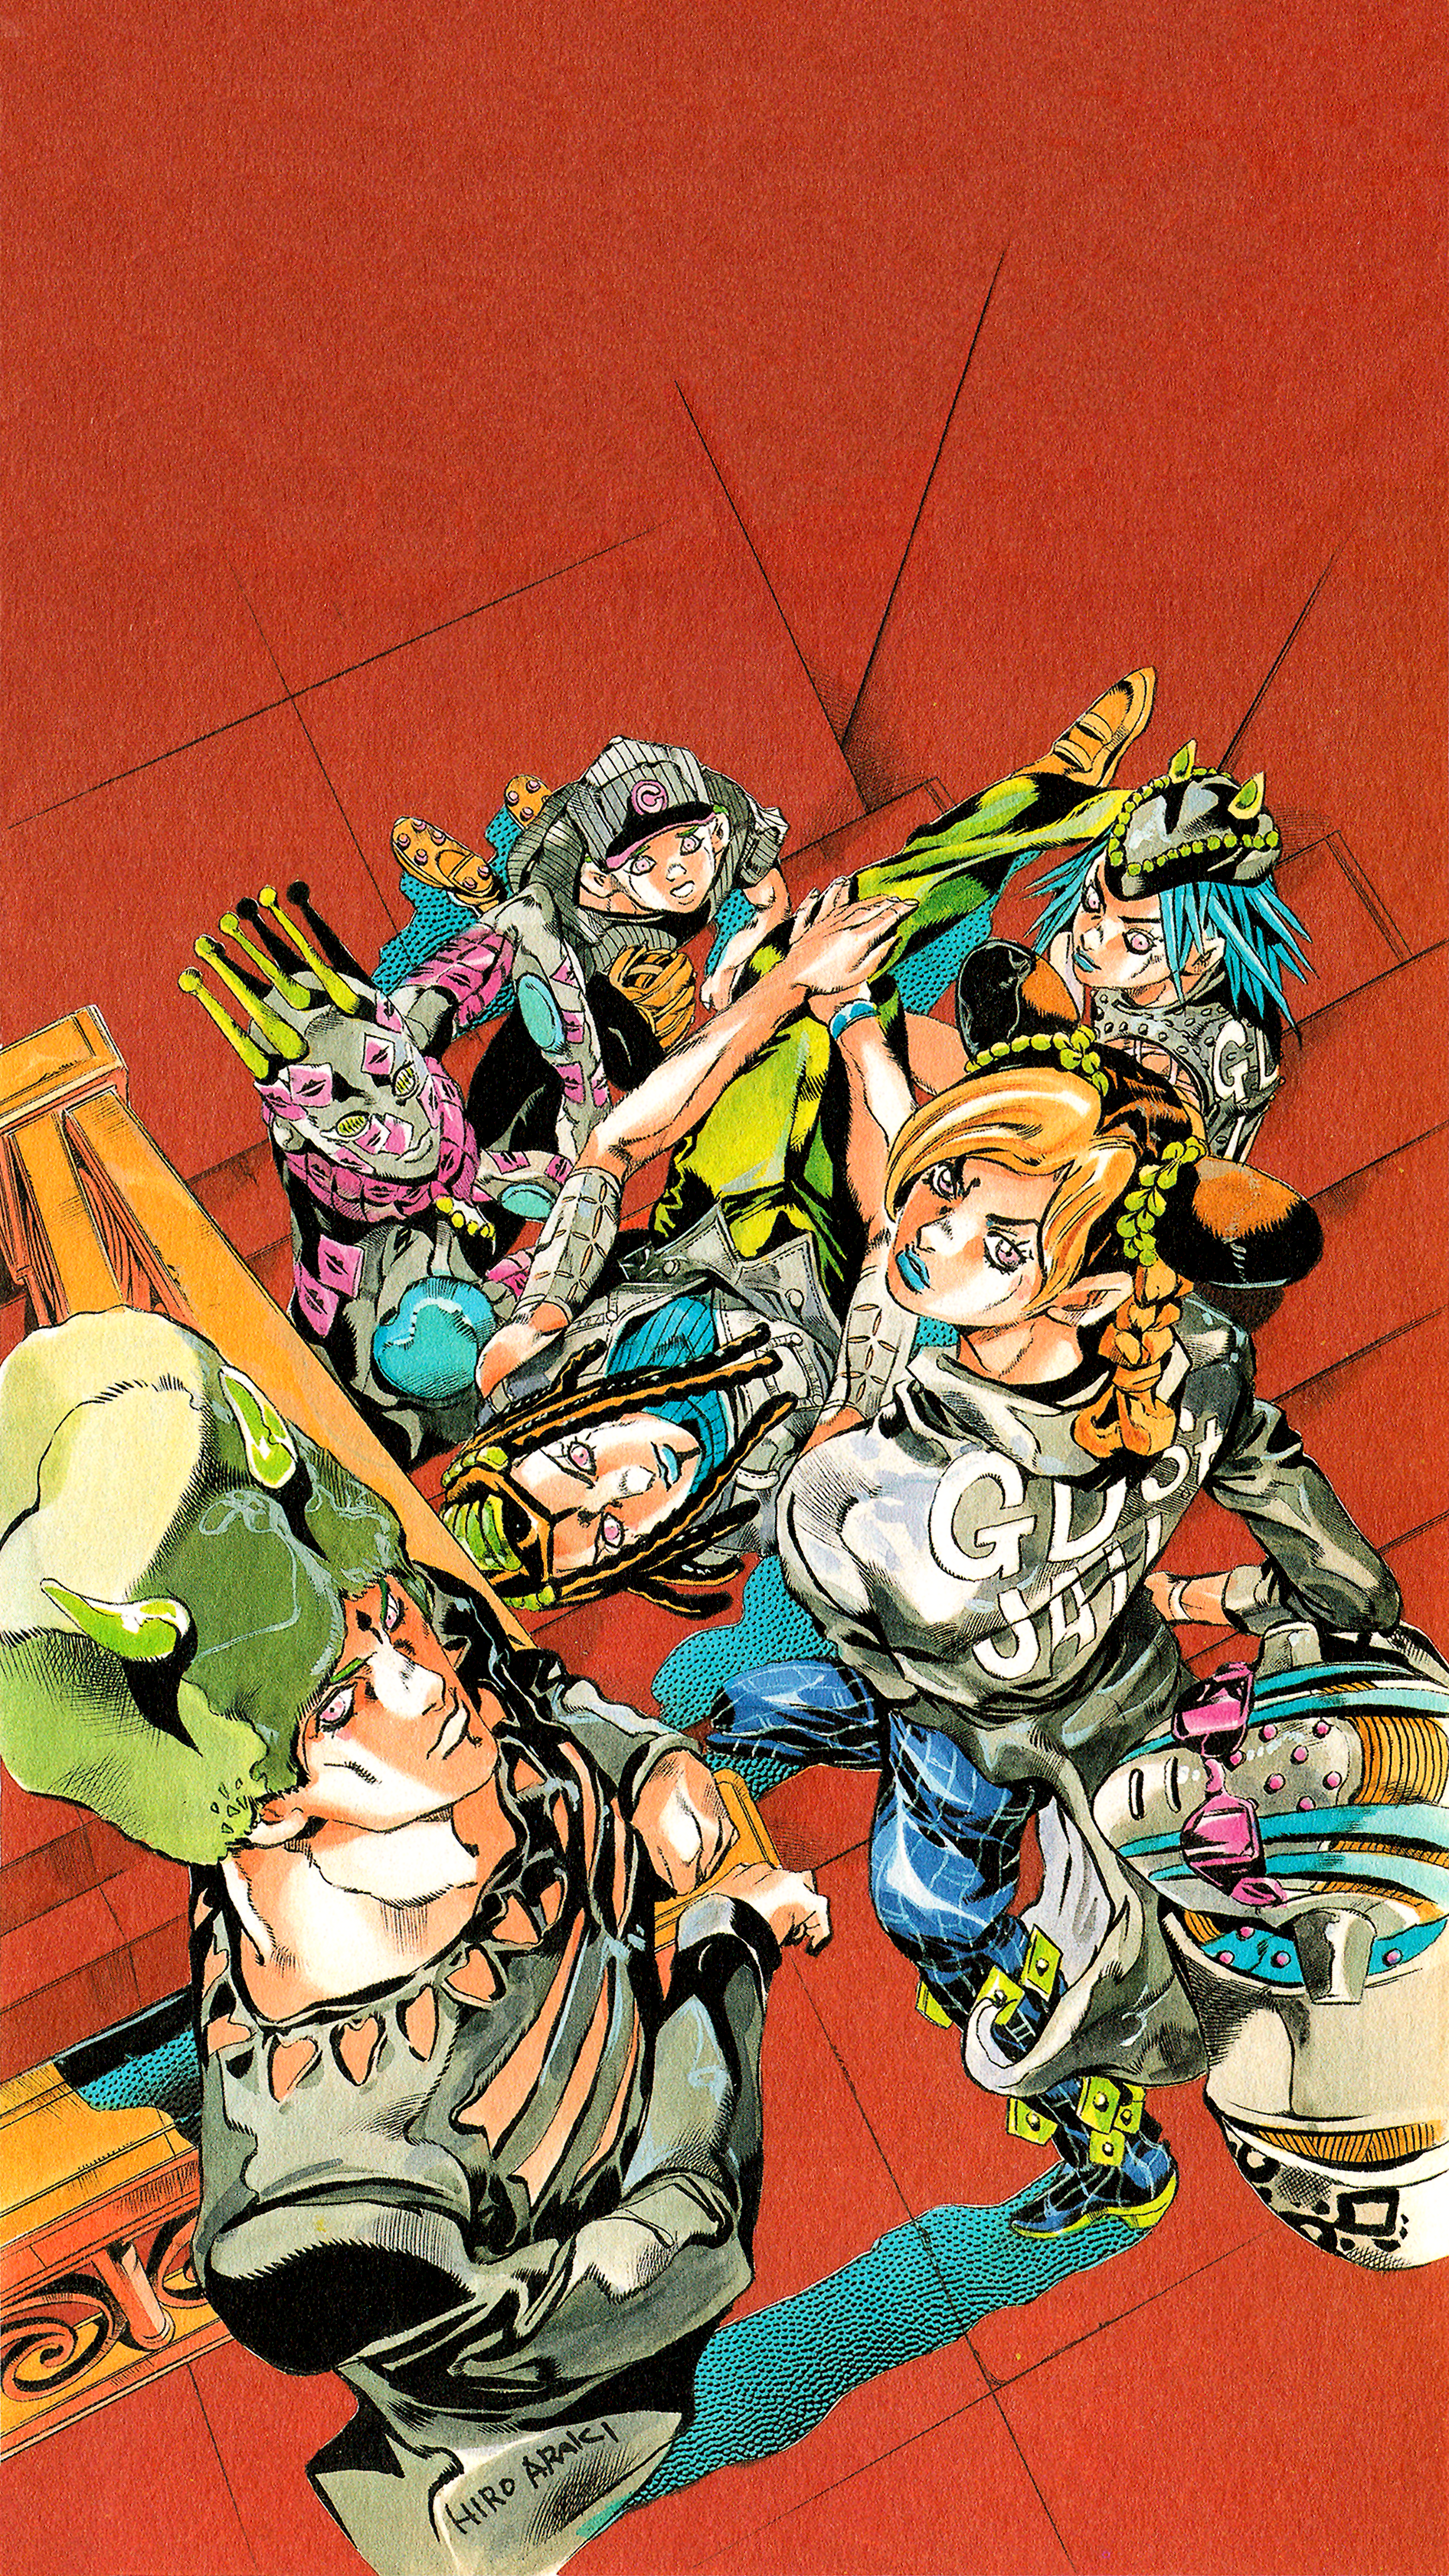 Posting a wallpaper a day until stone ocean is animated day 108: the GDSP crew